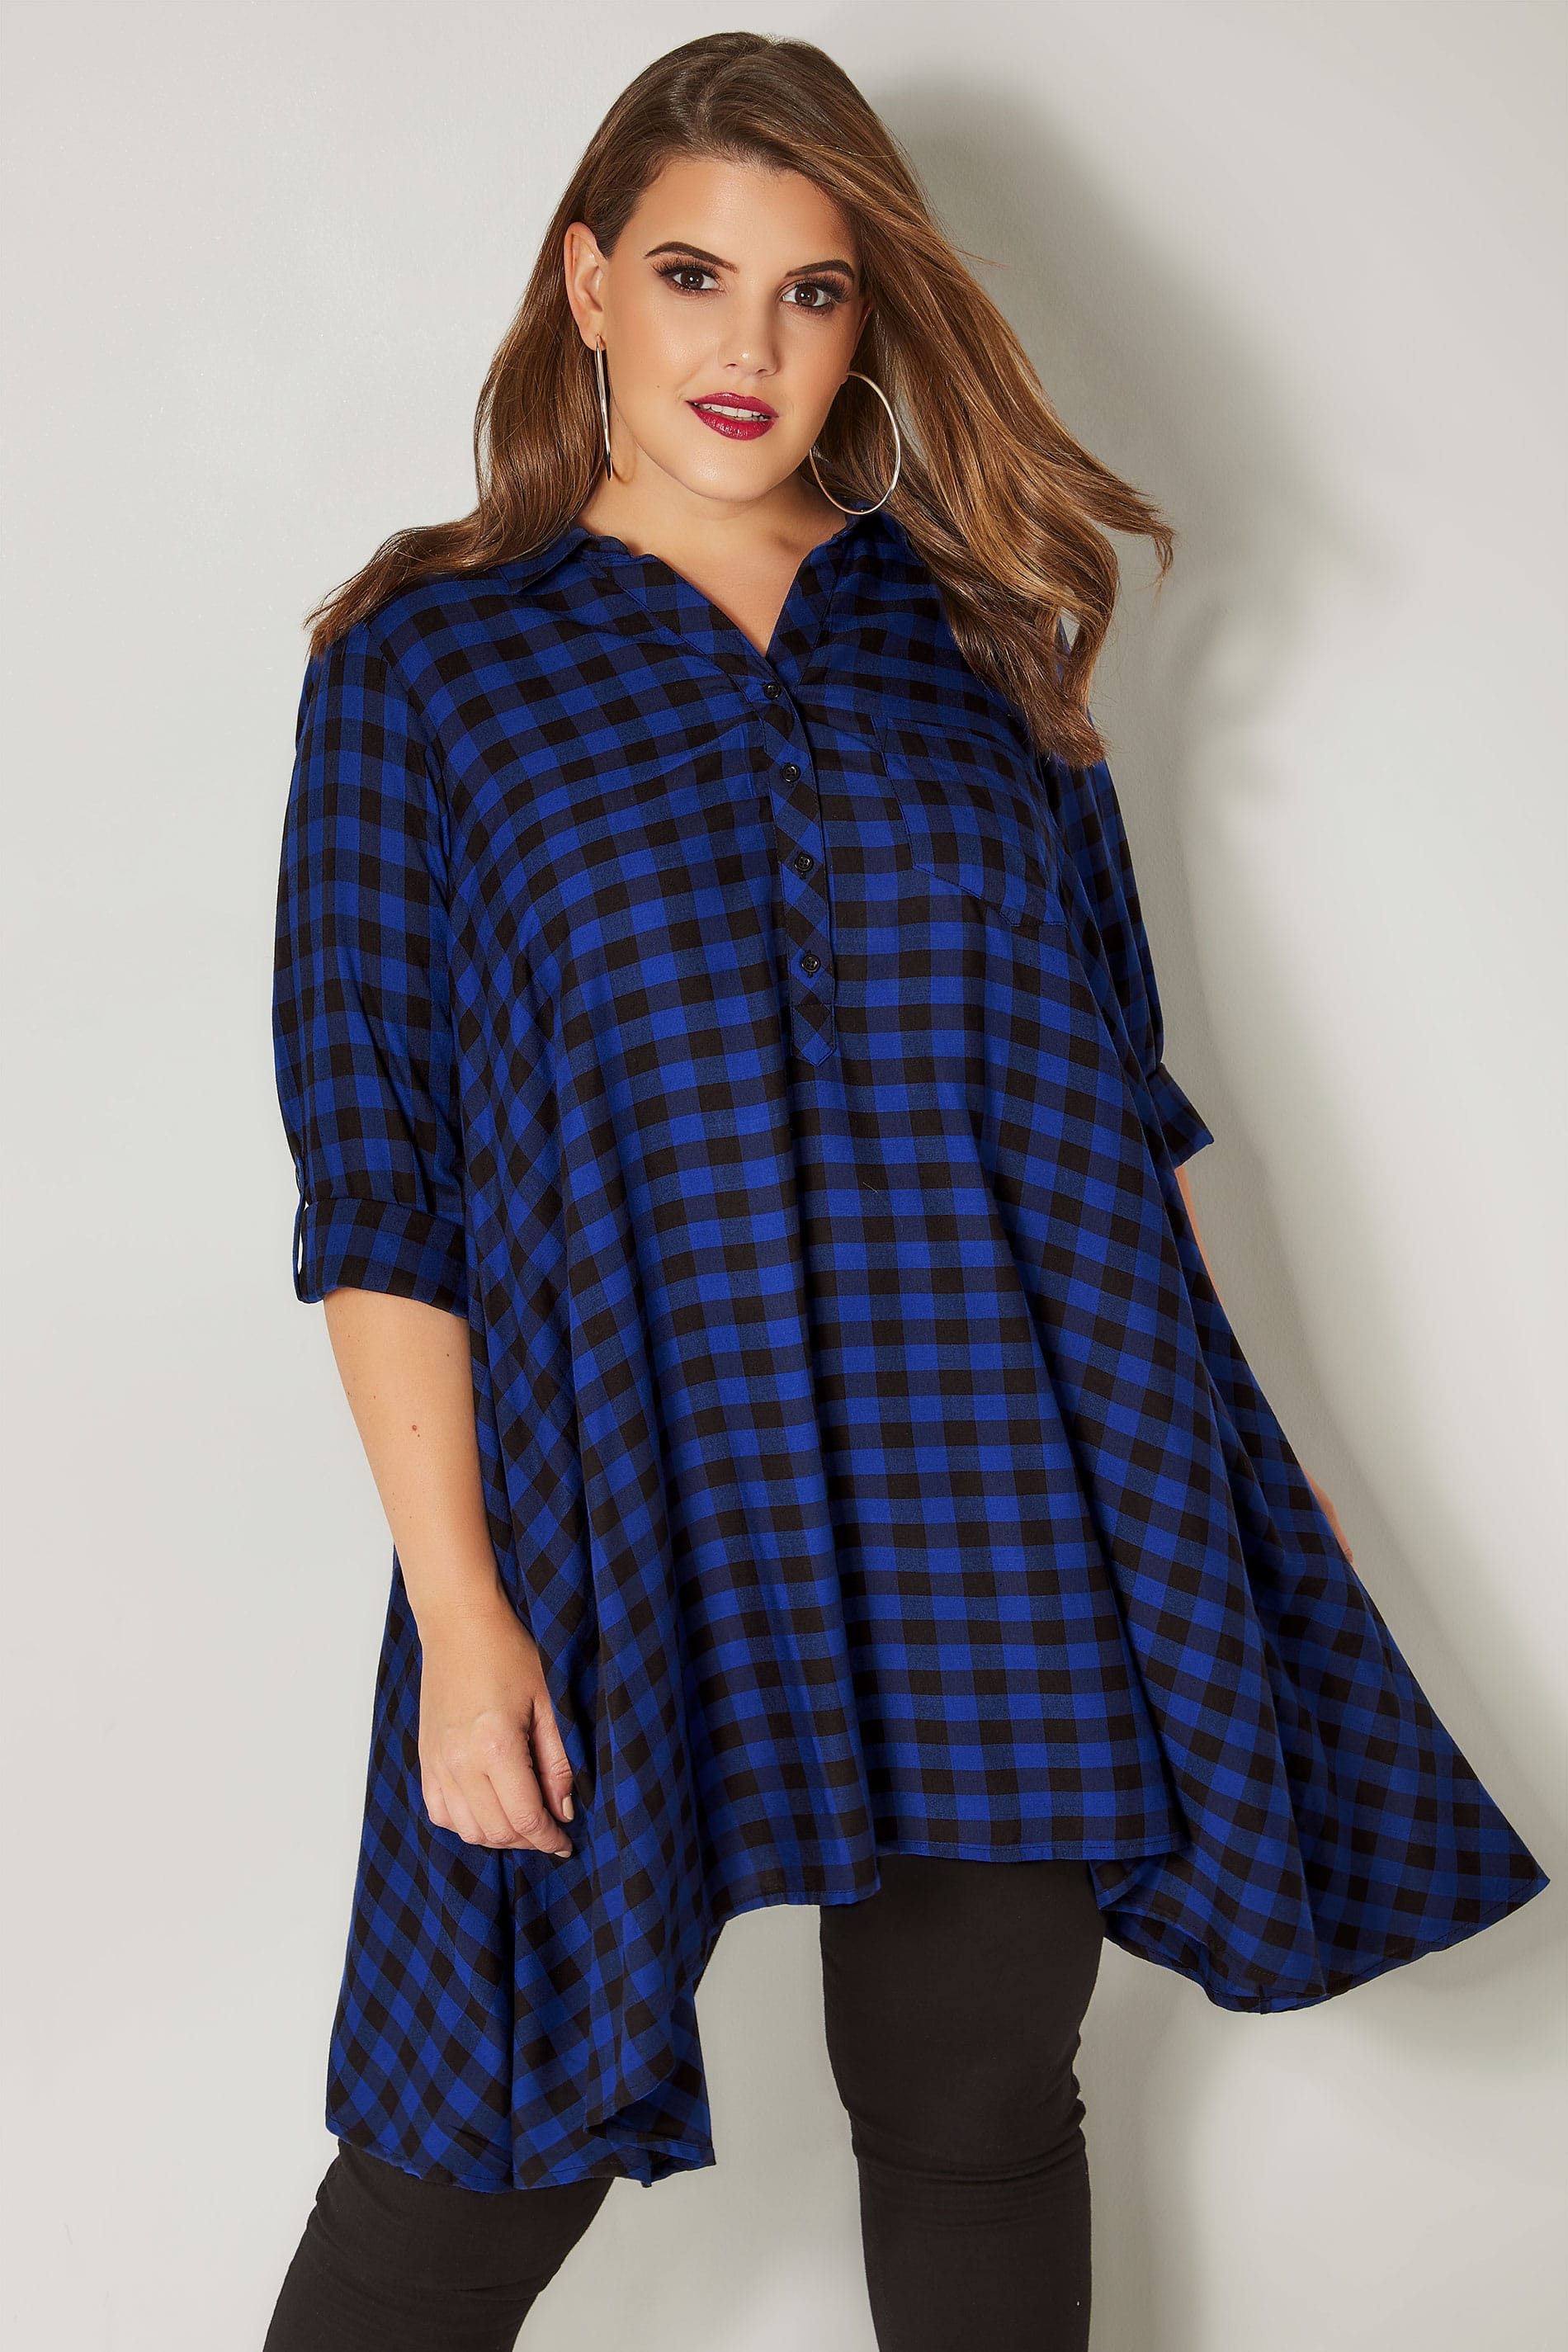 Cobalt Blue Longline Checked Shirt With Hanky Hem, plus size 16 to 36